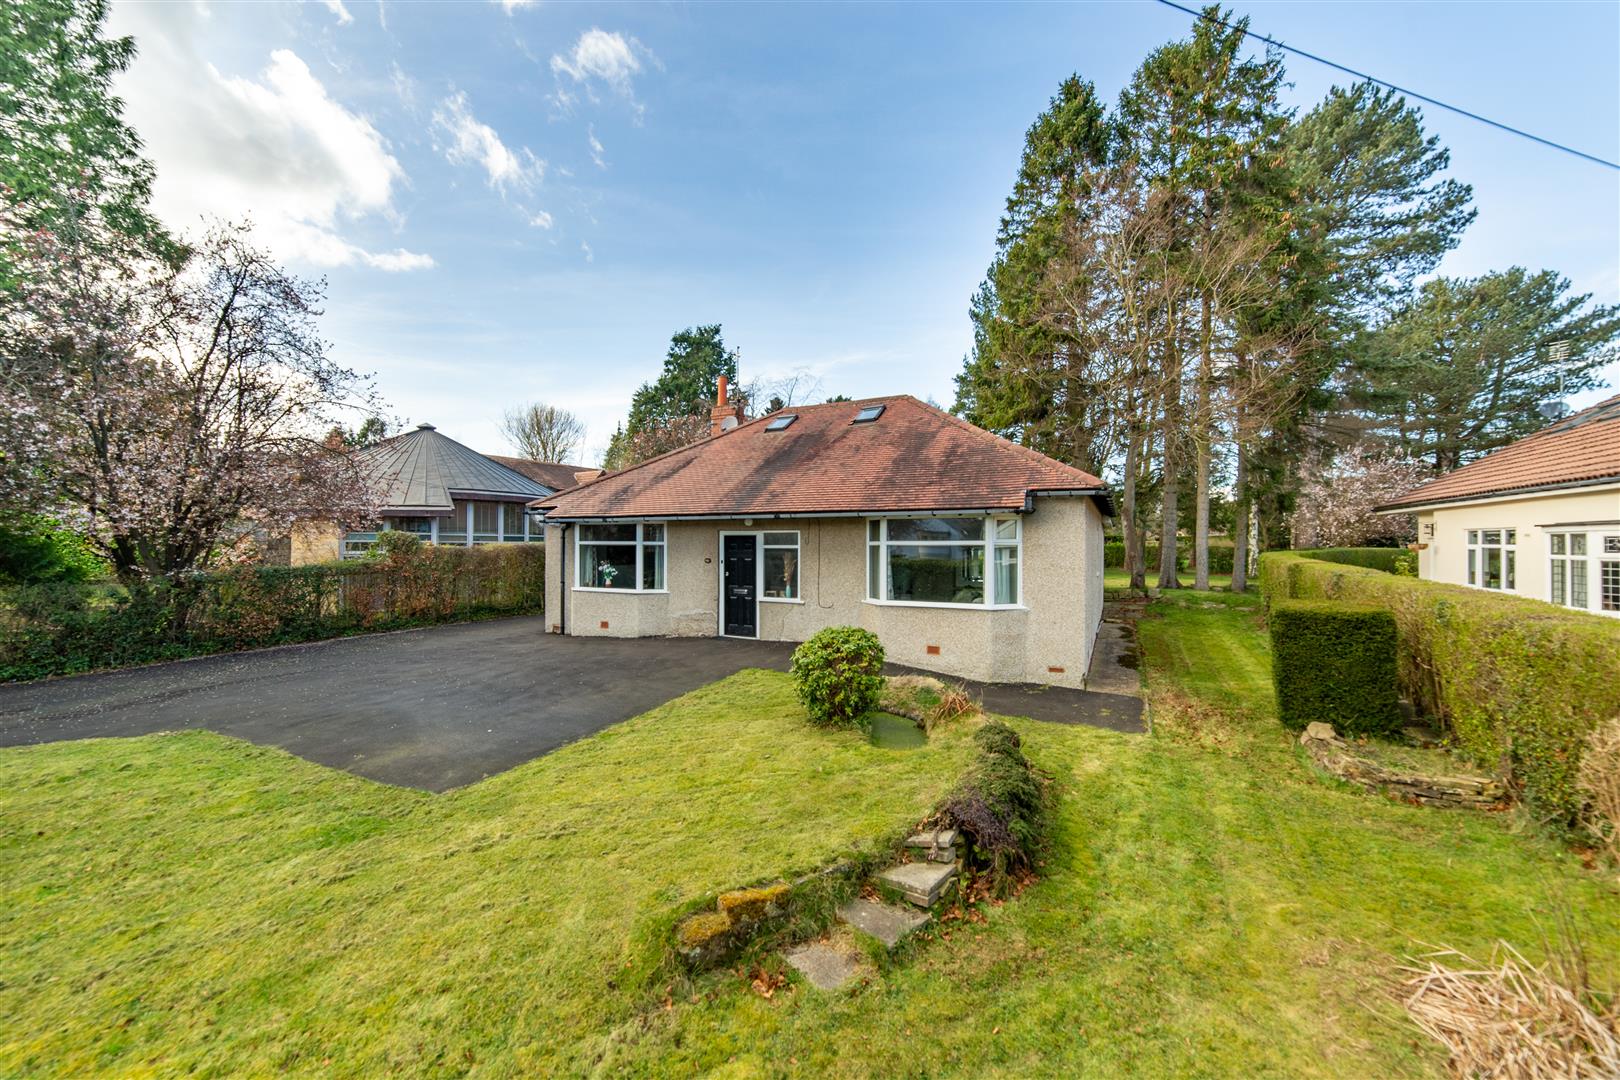 4 bed detached bungalow for sale in Darras Road, Ponteland - Property Image 1